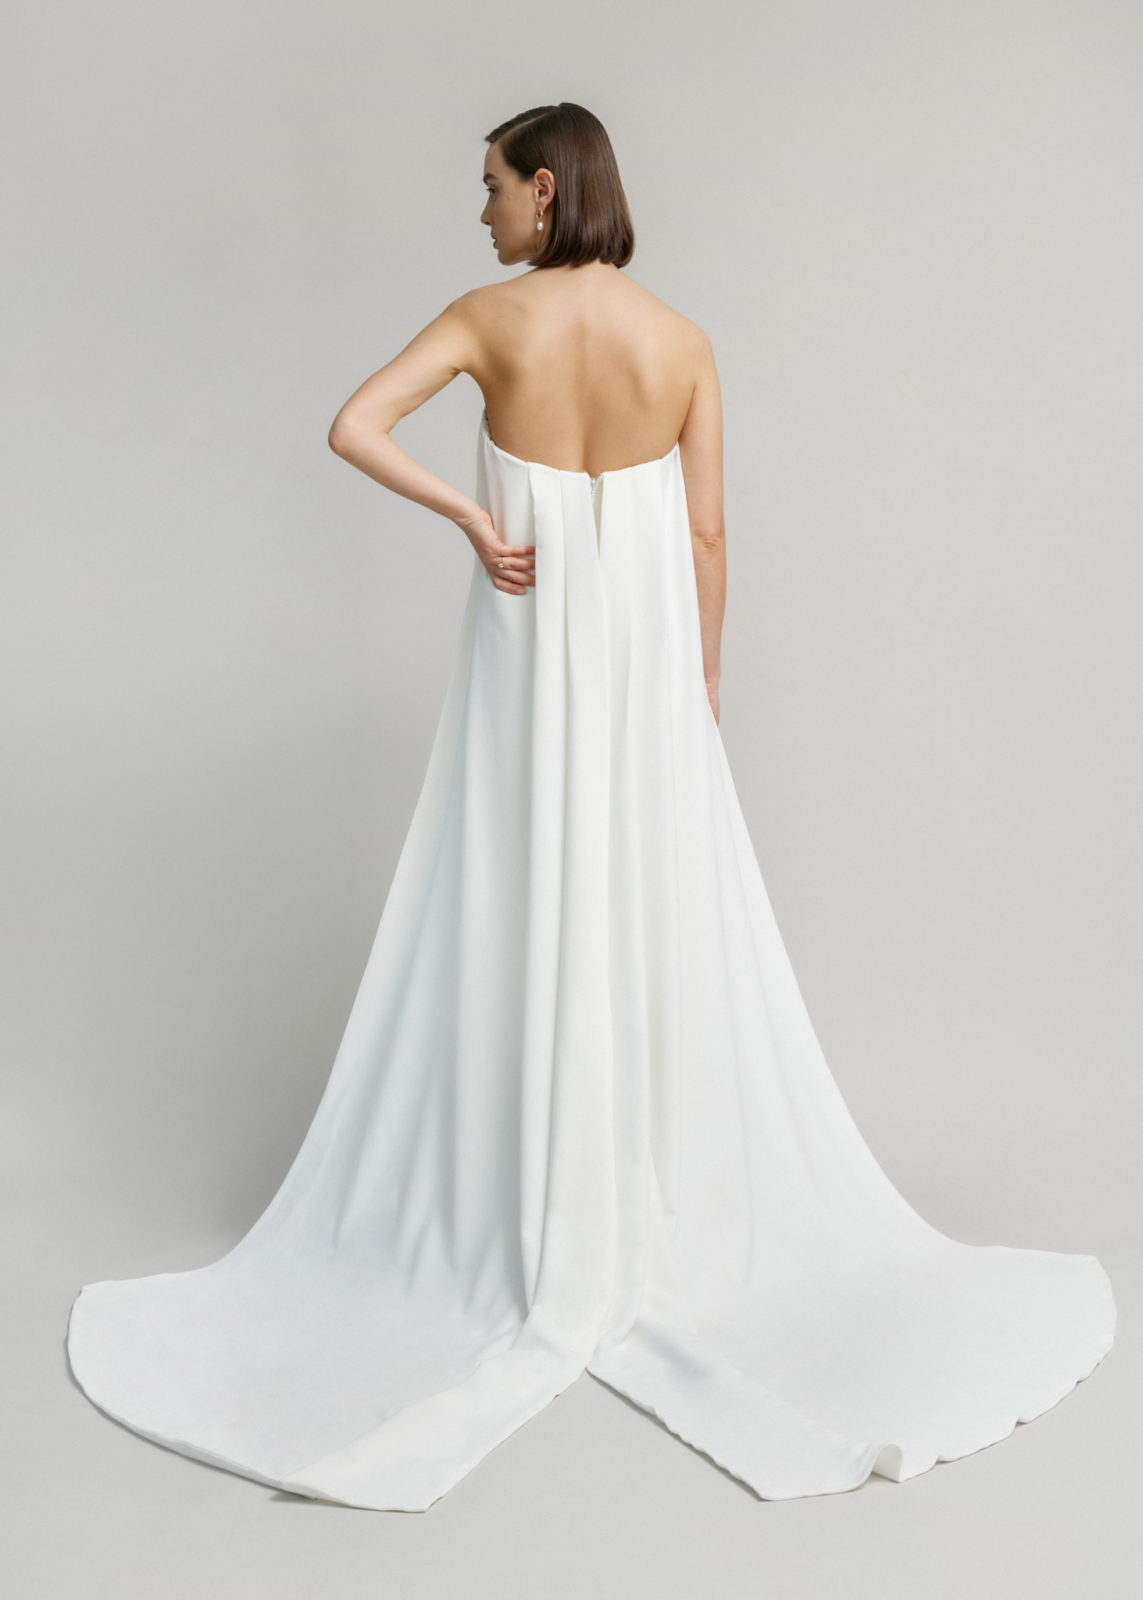 Our Favourite 2022 Wedding Gowns from Laudae, Aesling, and Truvelle Newest Collections Featured by Brontë Bride